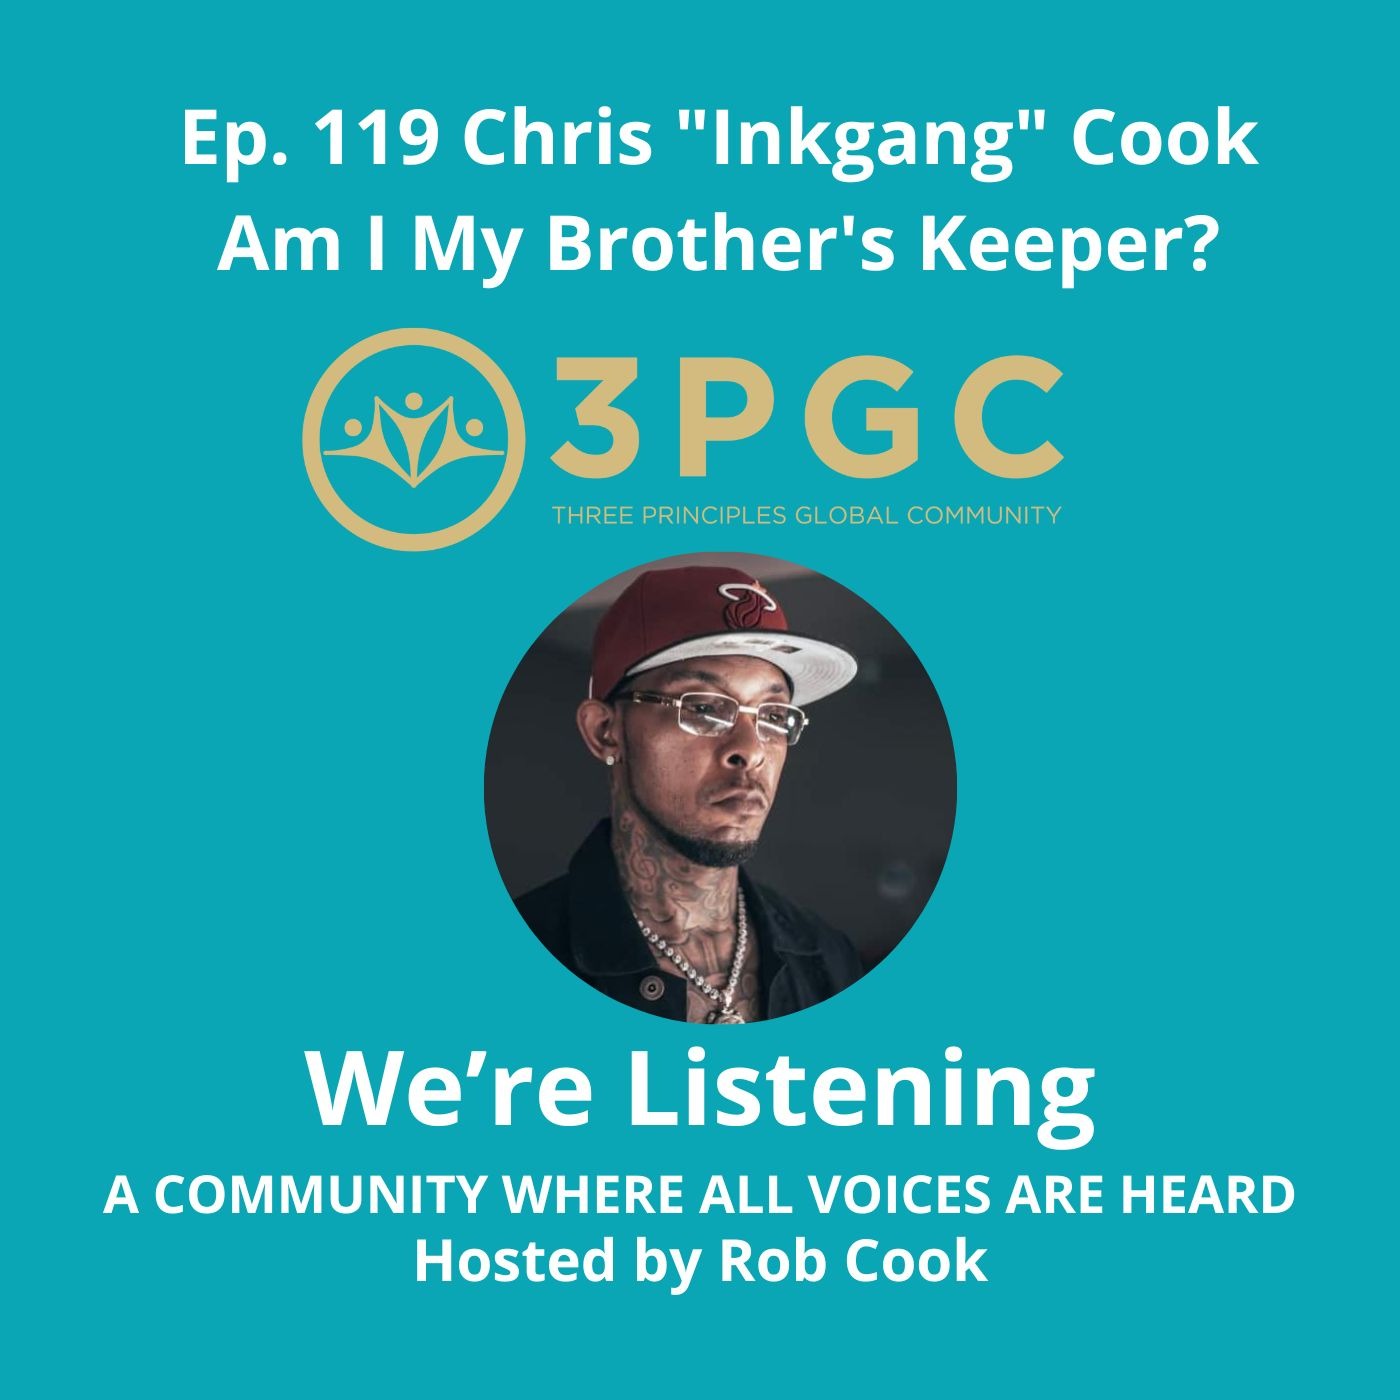 Ep. 119 Chris "Inkgang" Cook "Am I My Brother's Keeper?"